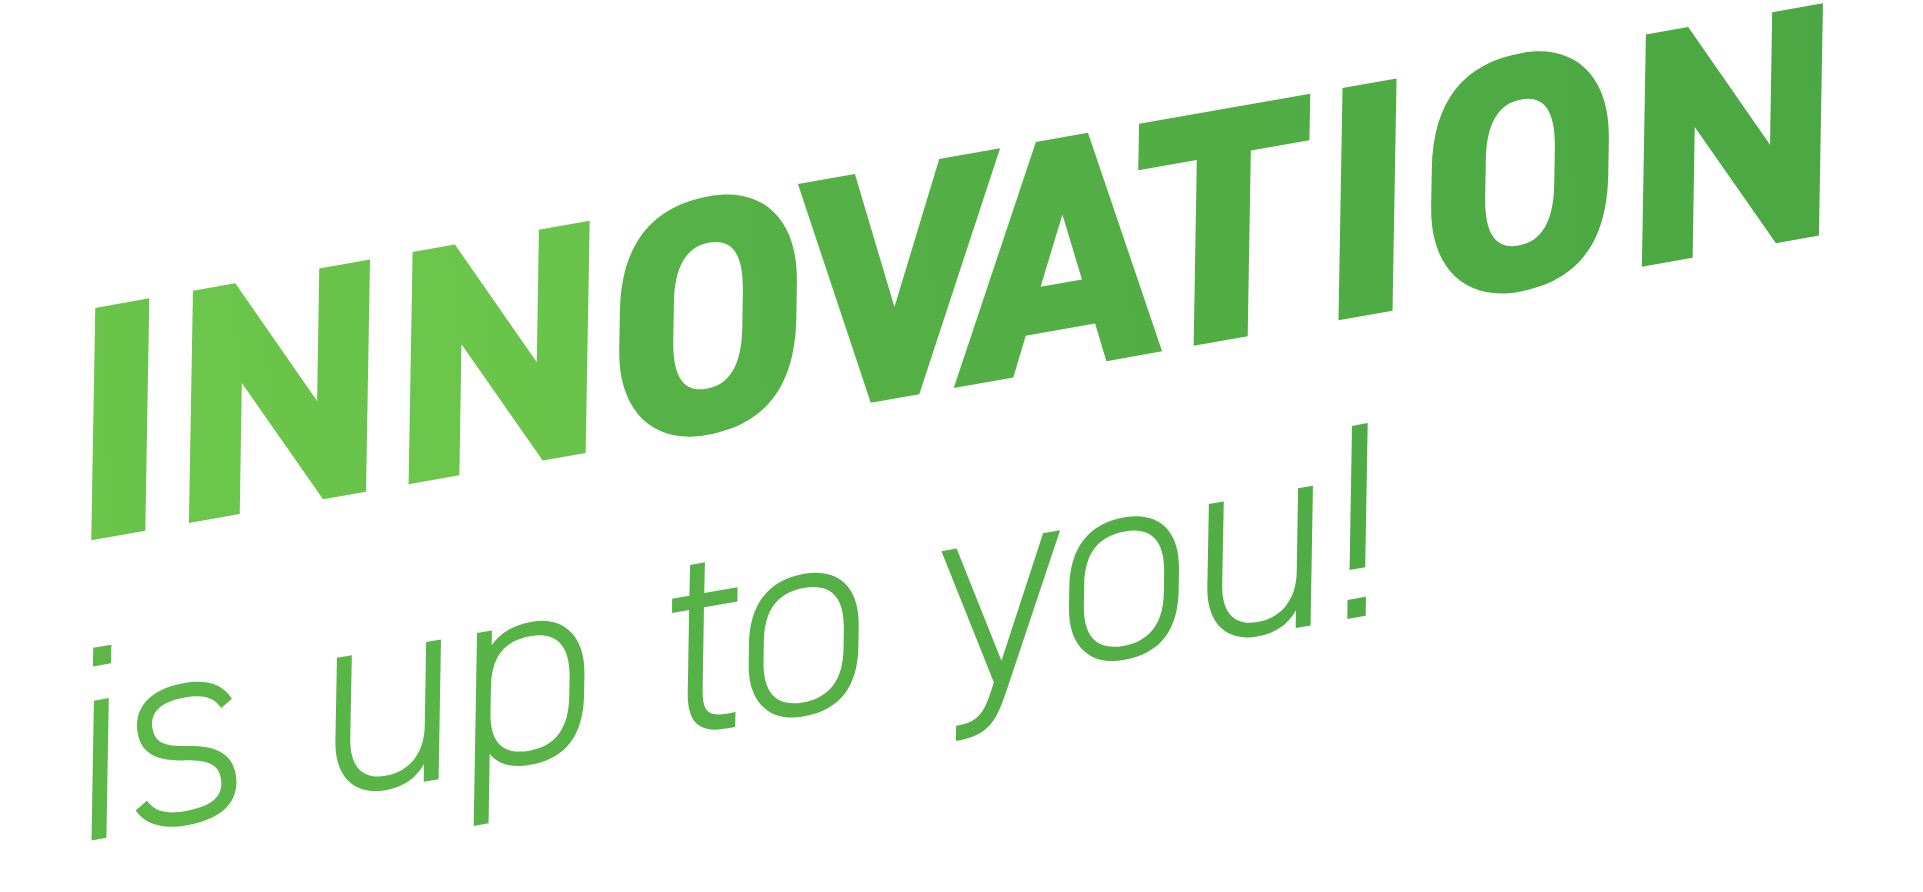 INNOVATION is up to you!